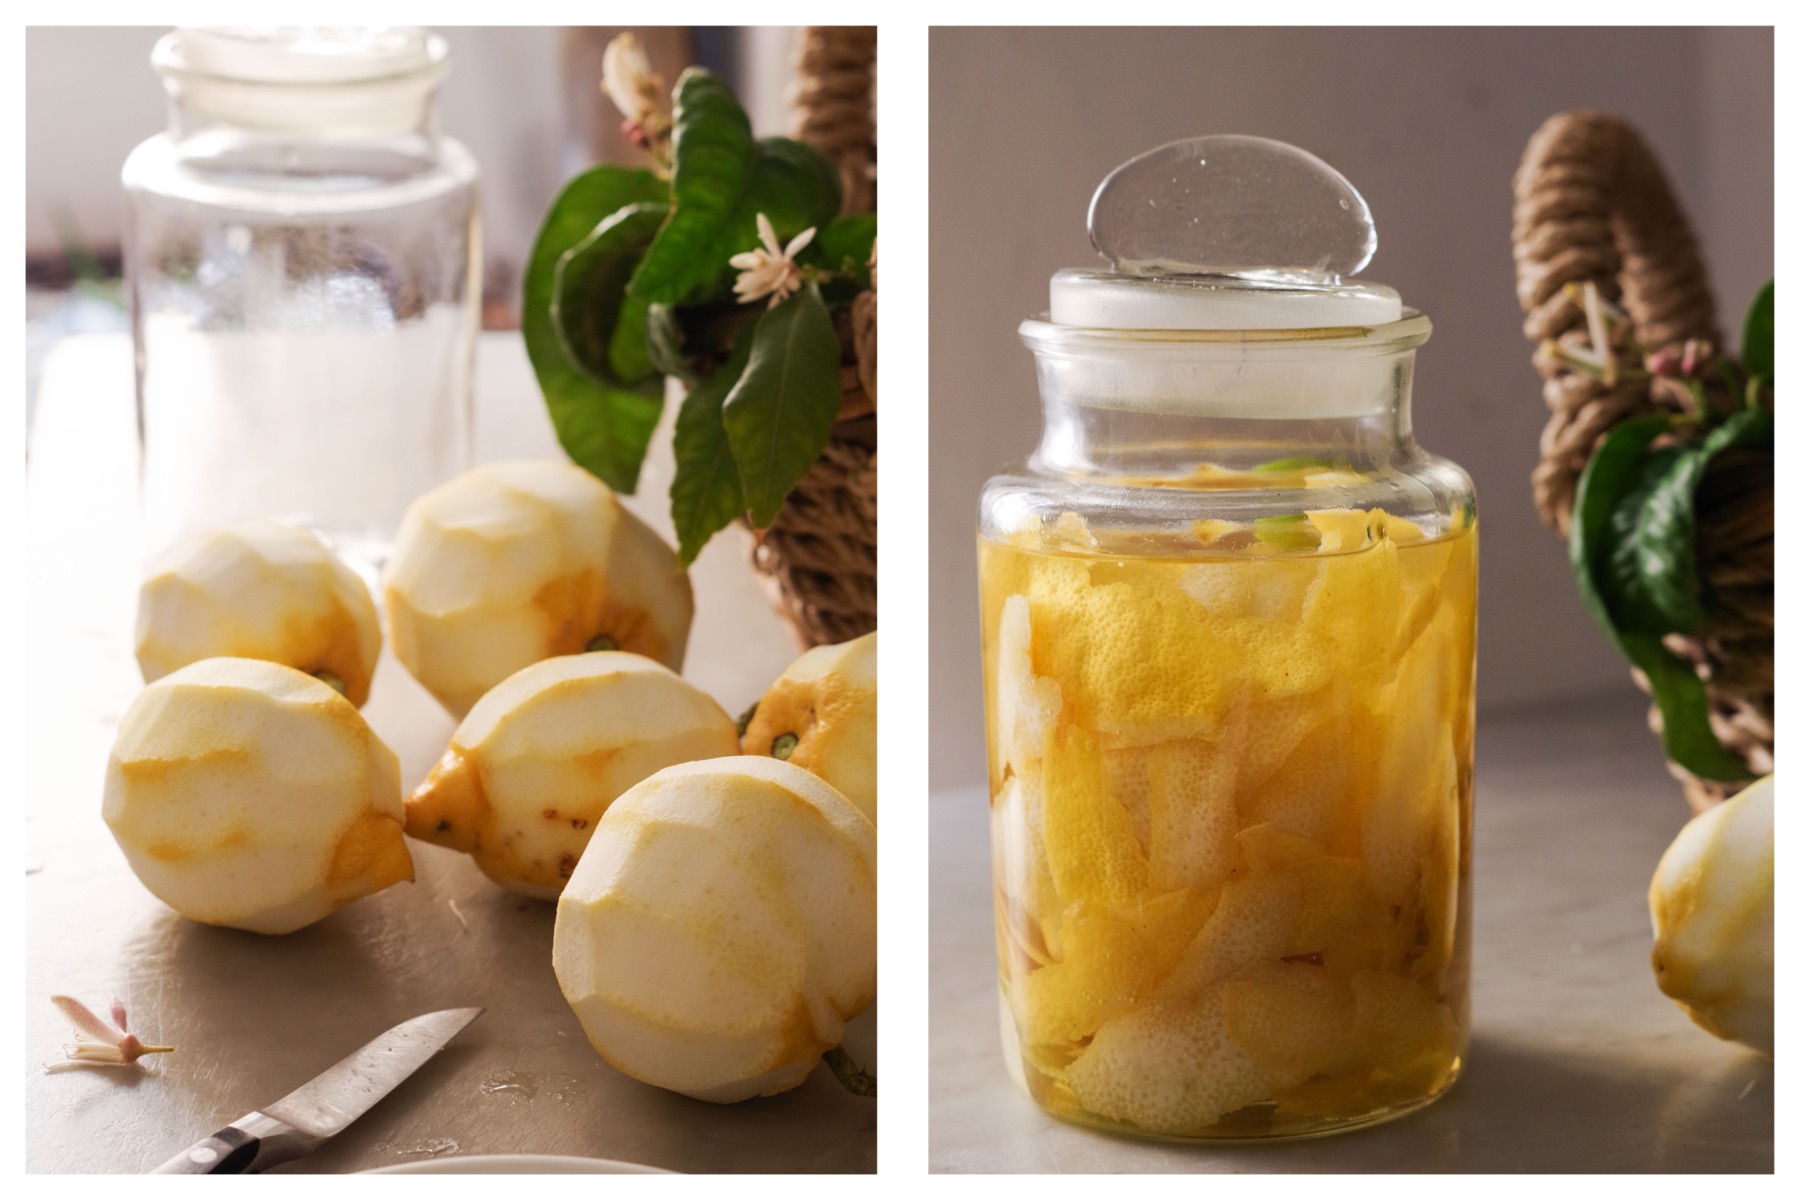 A limoncello recipe work in progress: maceration phase